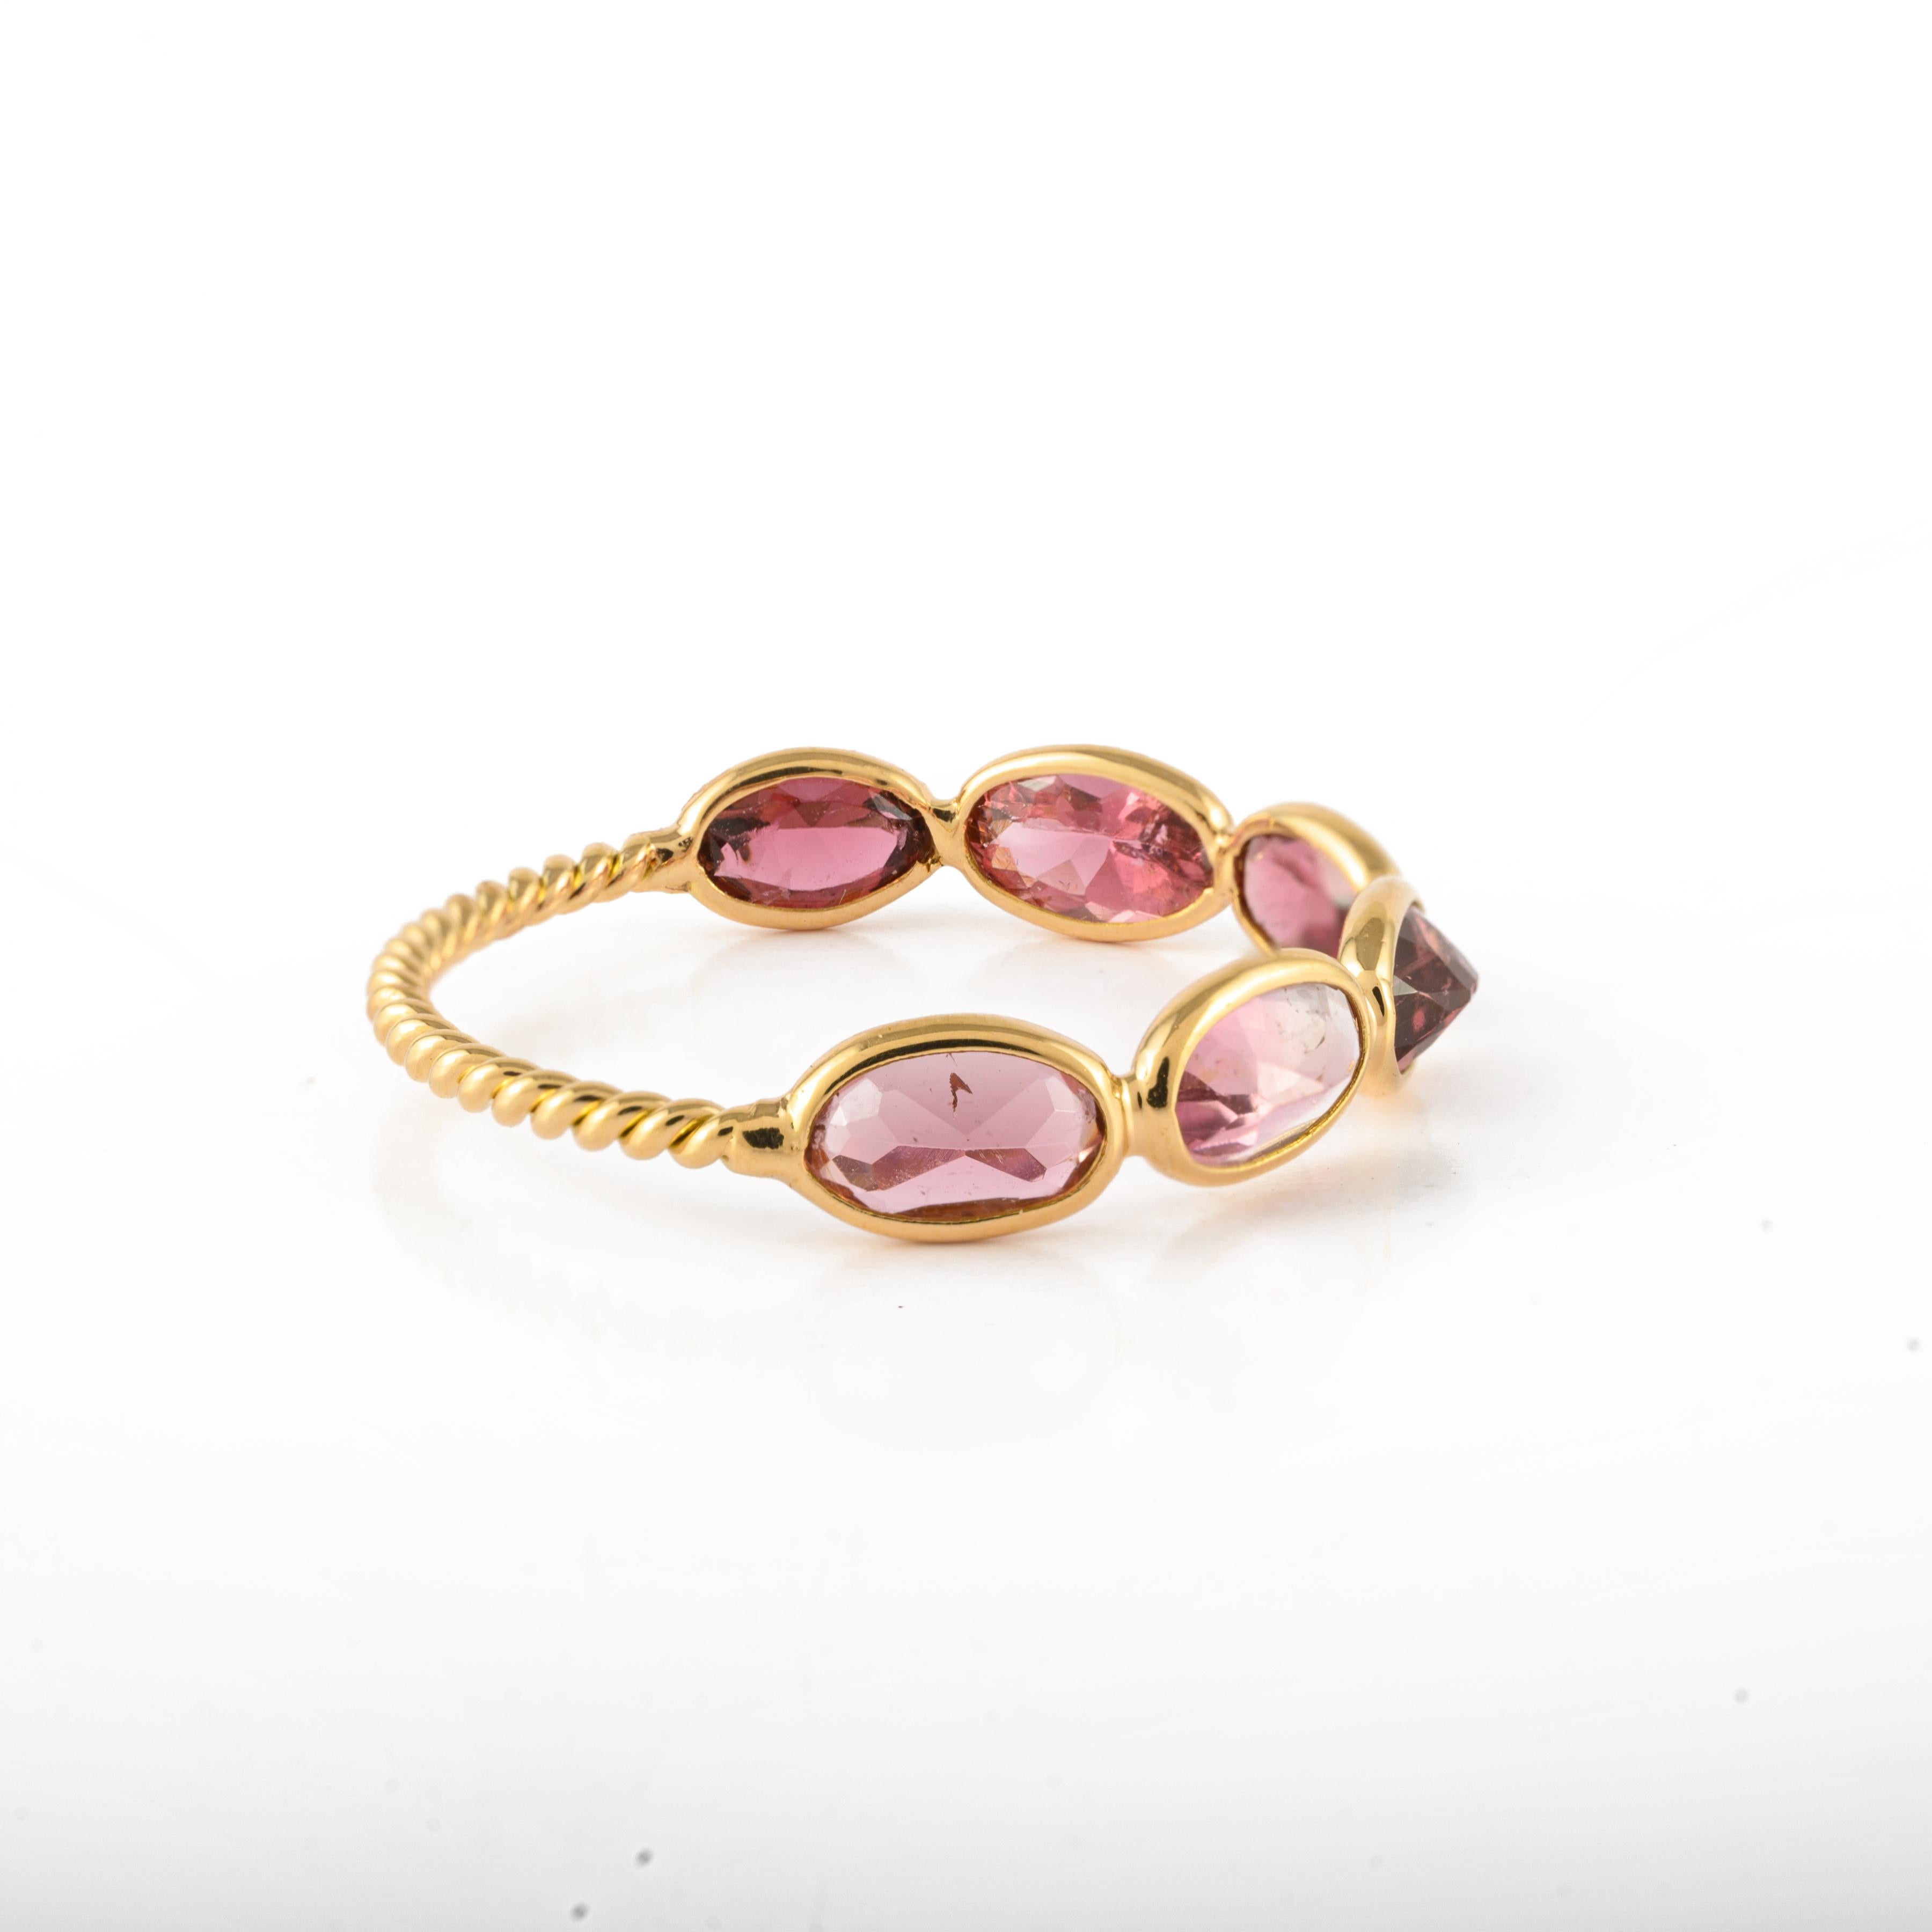 For Sale:  Minimalist Pink Tourmaline Half Eternity Band Ring in 18k Yellow Gold 6